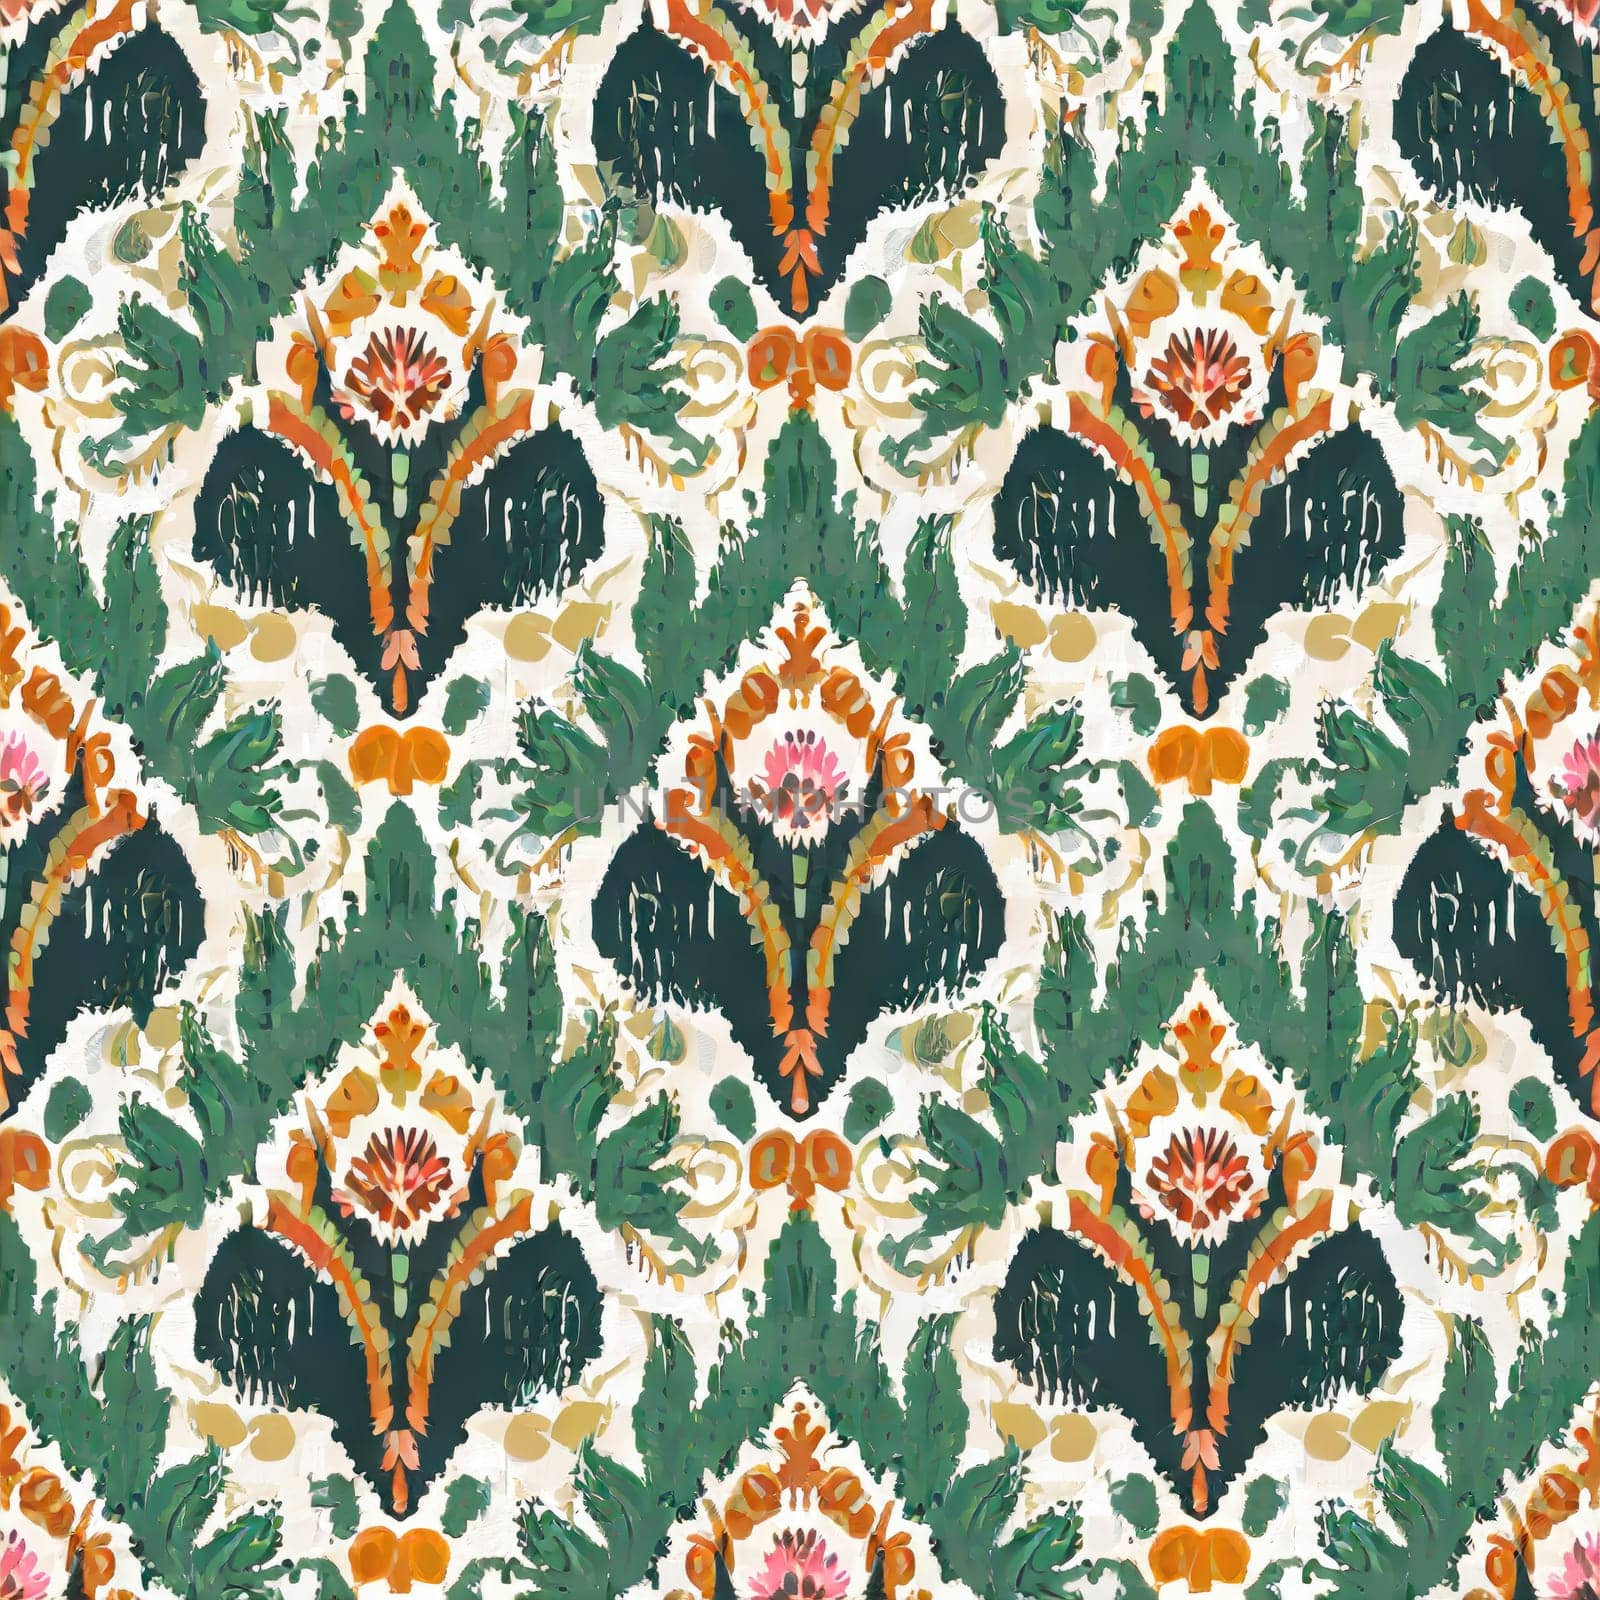 Seamless geometric pattern. Ethnic and tribal motifs. Patchwork ornament in bohemian style. Print for carpets, blankets, pillows. by PeaceYAY